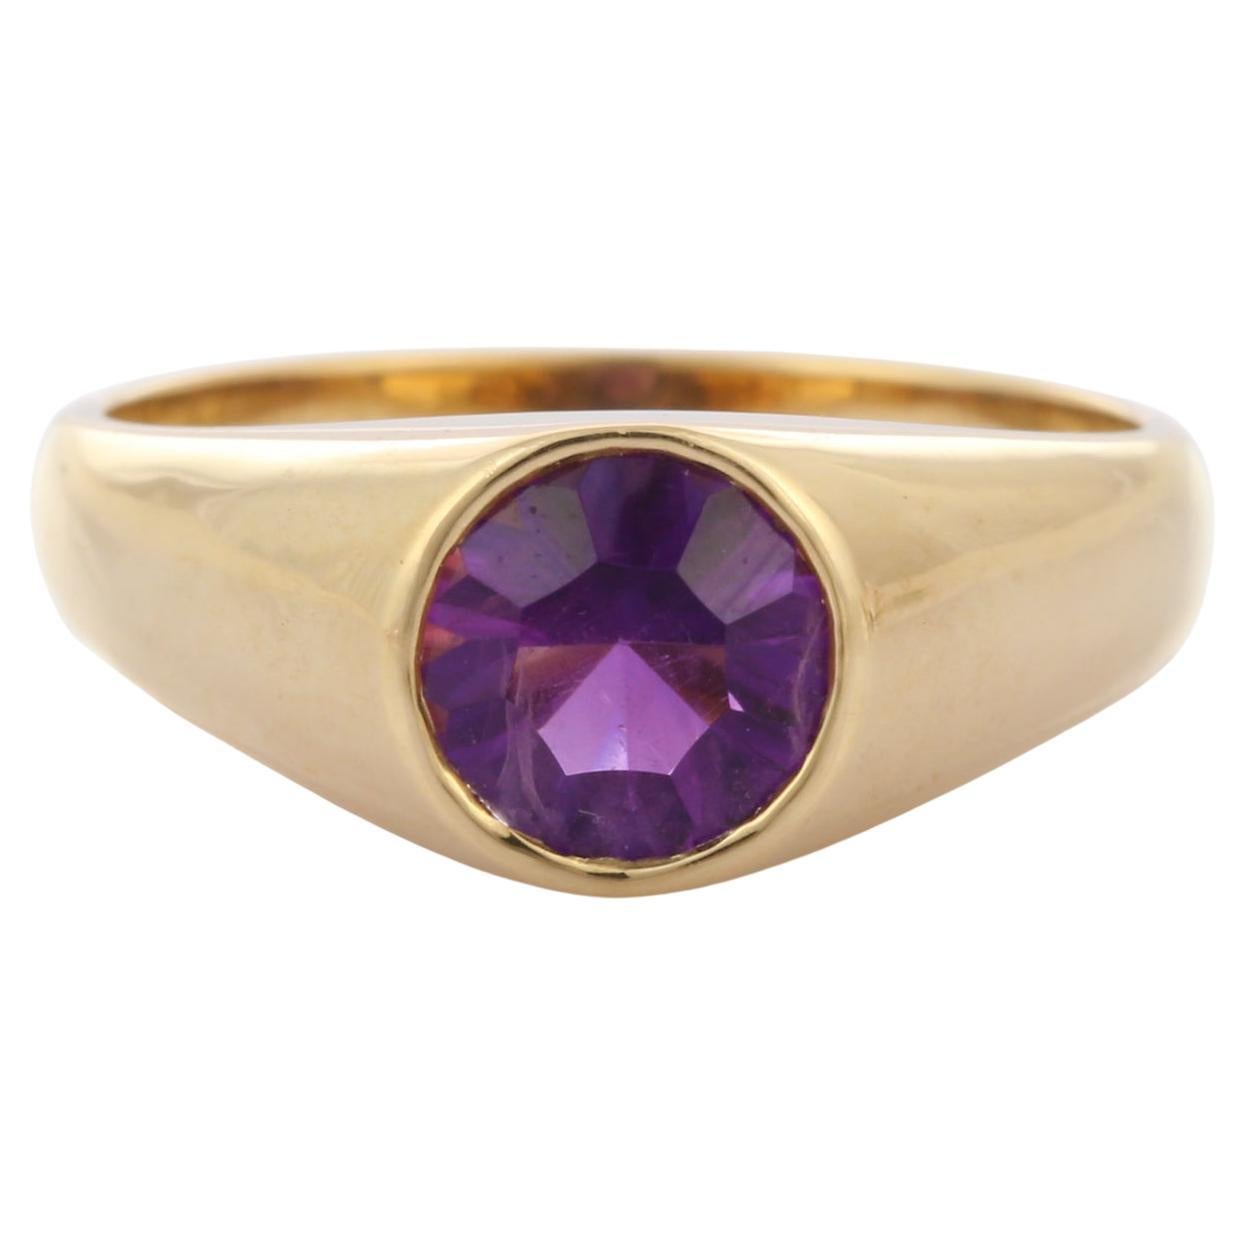 For Sale:  Unisex 14 Karat Yellow Gold Round Cut Amethyst Solitaire Ring